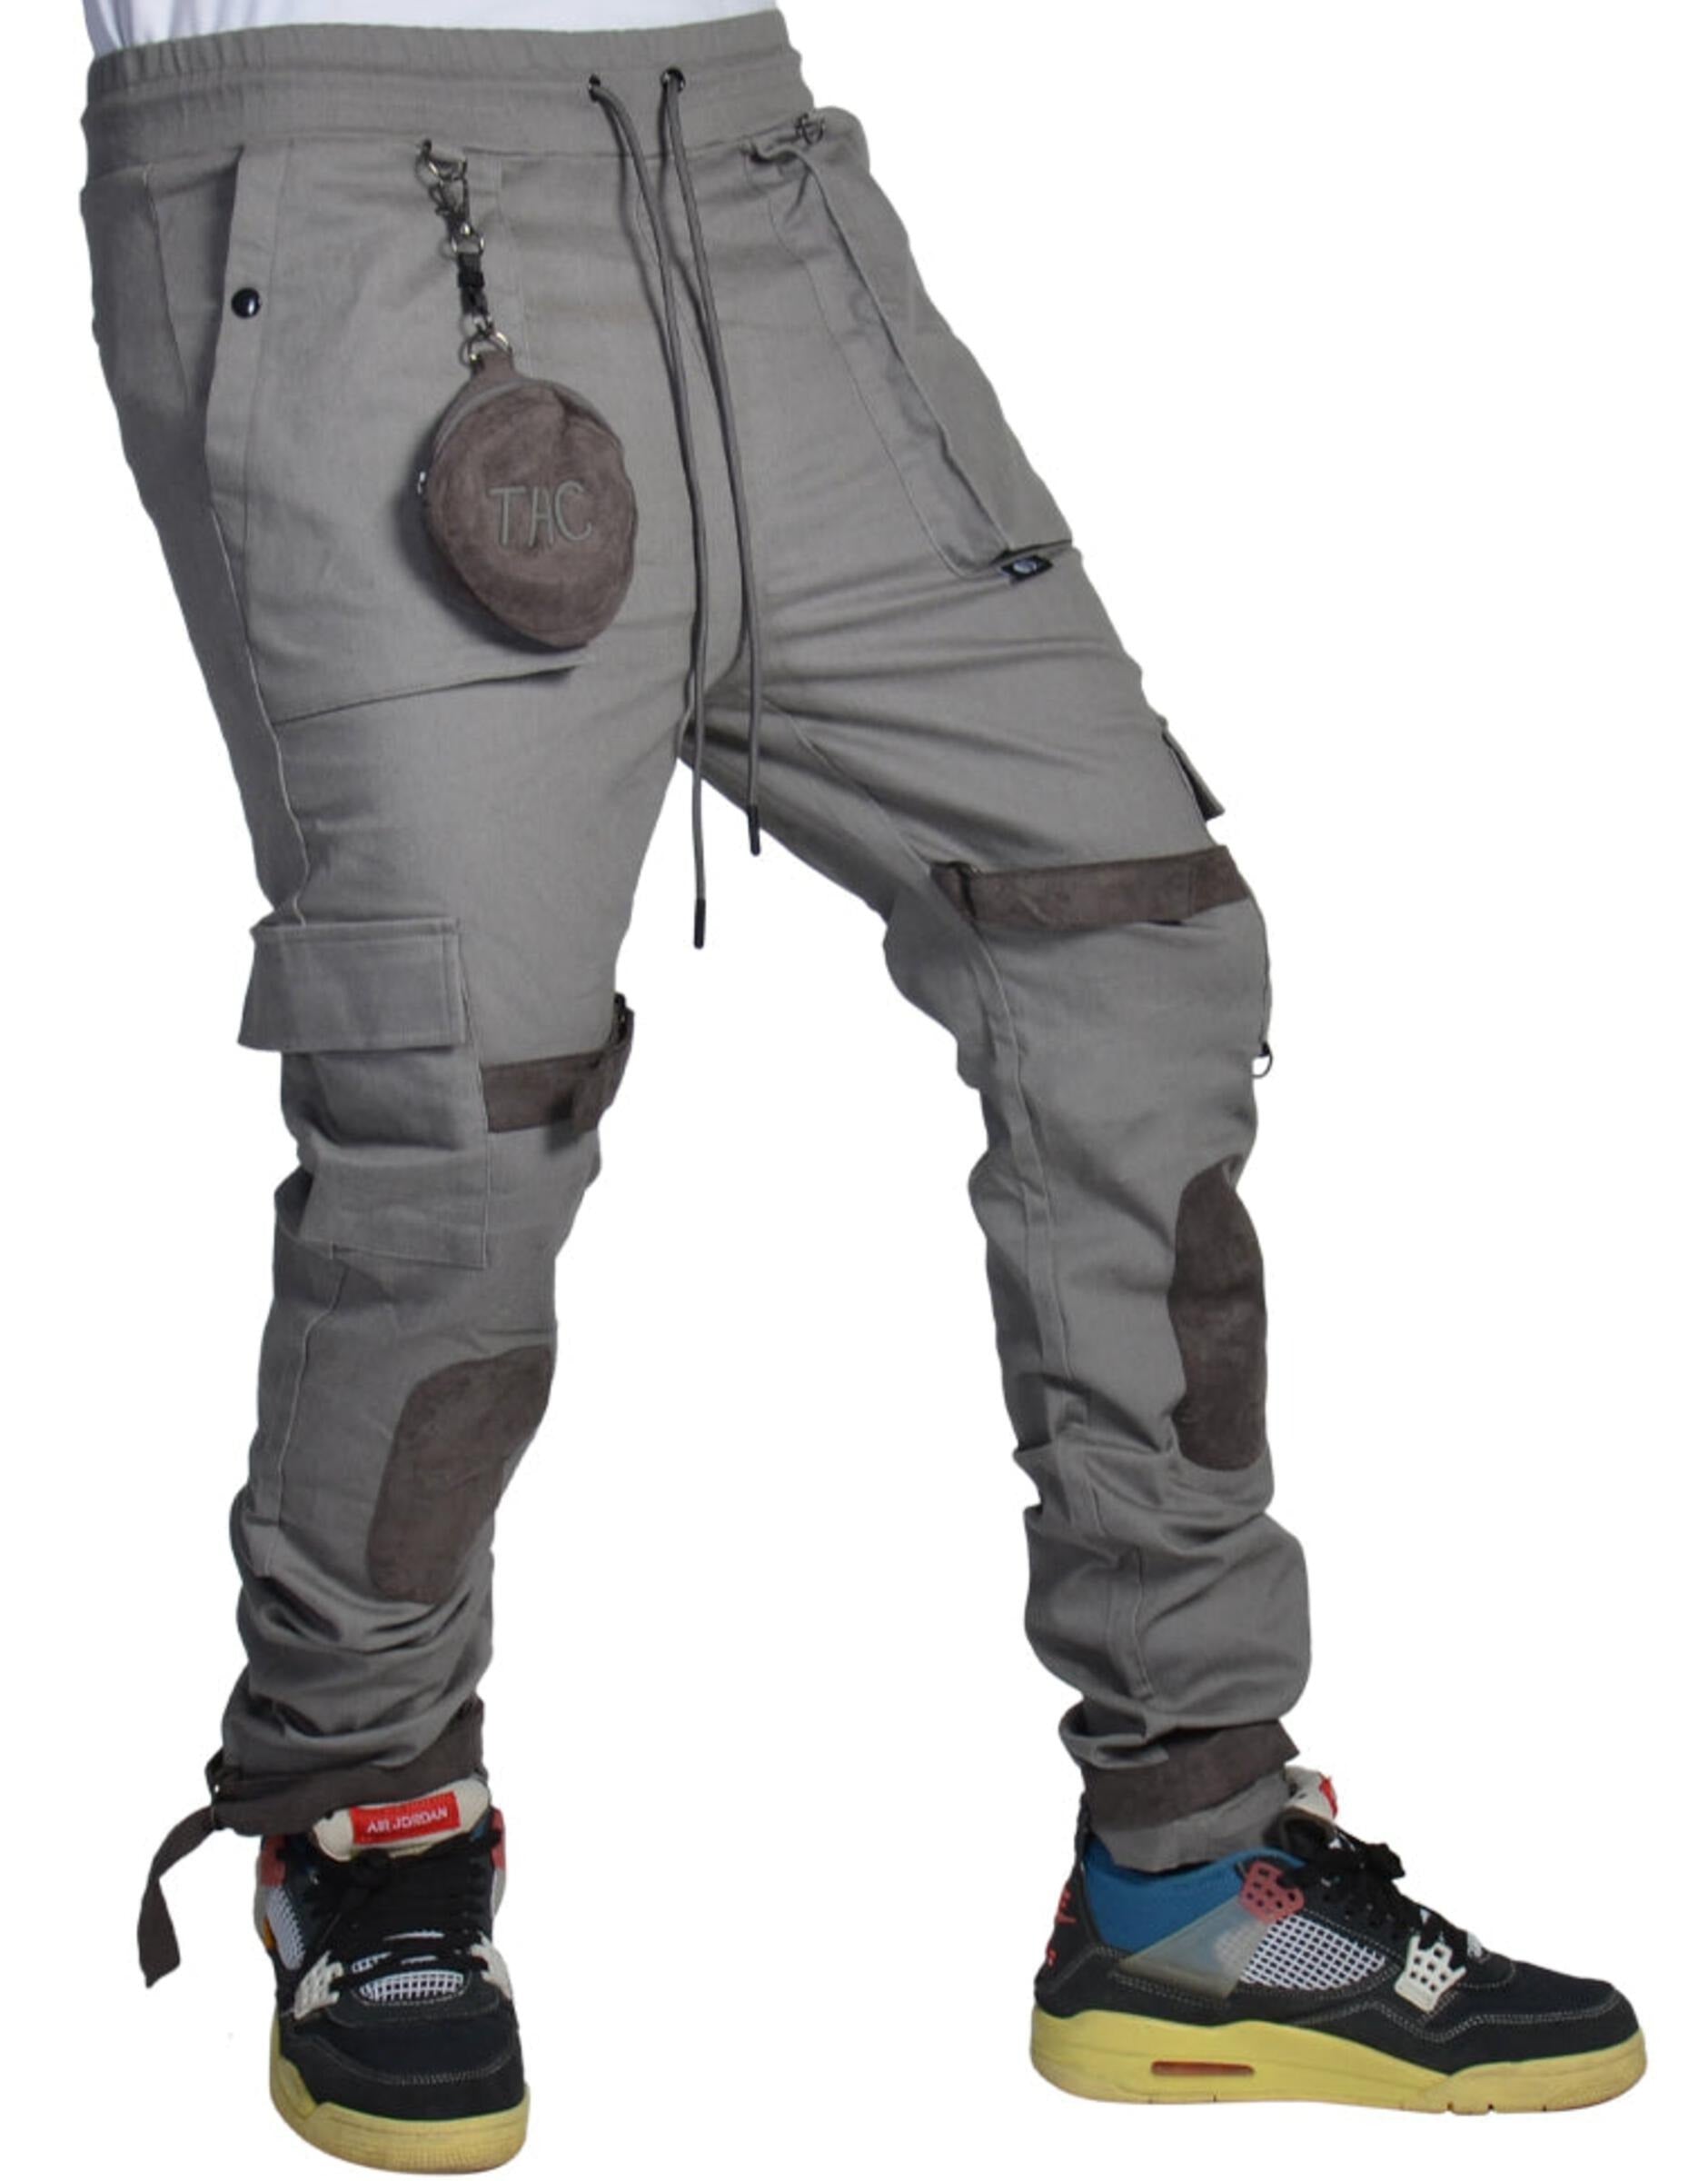 Men, Boys, Teens, Gifts, Wmns, Girls, Urban, Style, Fashion, Cargo Pants, The Hideout Clothing, New Sphere Pouch Strap Cargo Pants, Grey Pants, Pouch, Sphere, Joggers, Jeans, Straps, Suede, 